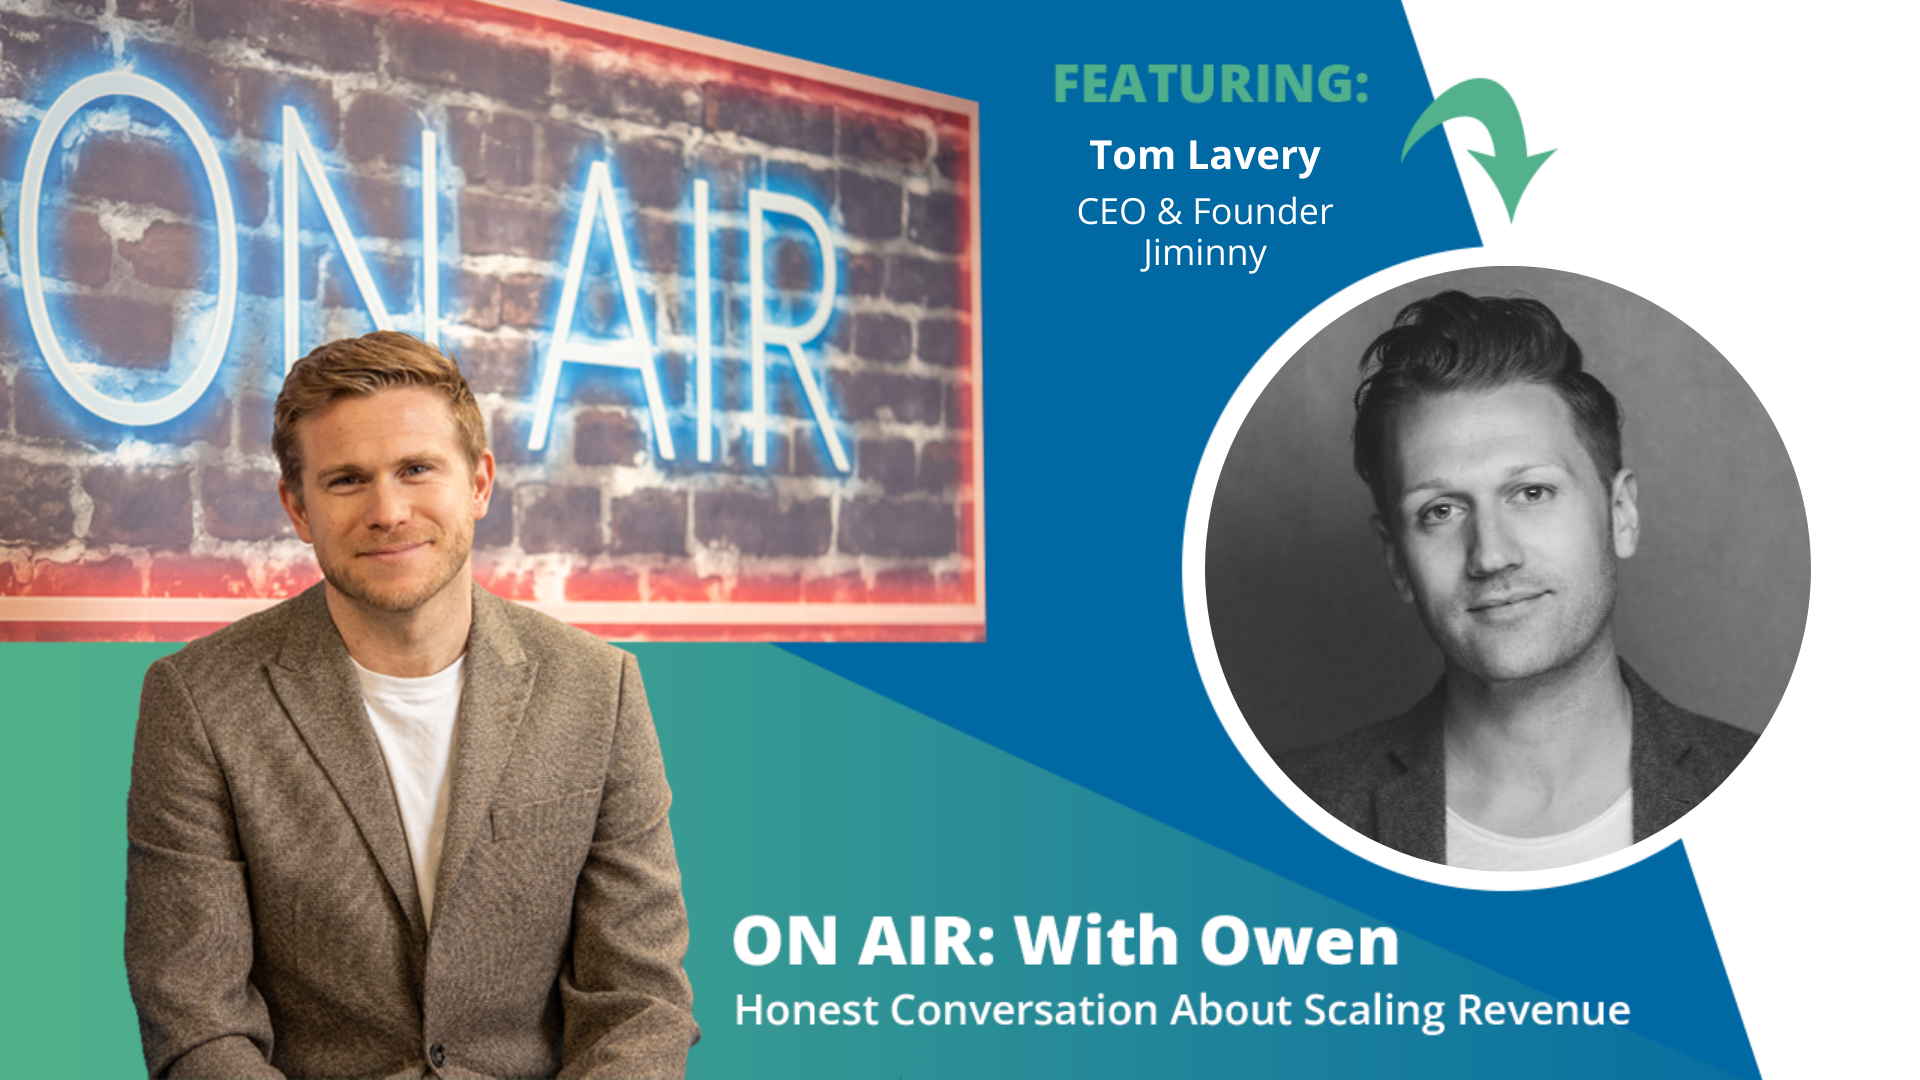 ON AIR: With Owen Episode 54 Featuring Tom Lavery – Founder & CEO at Jiminny